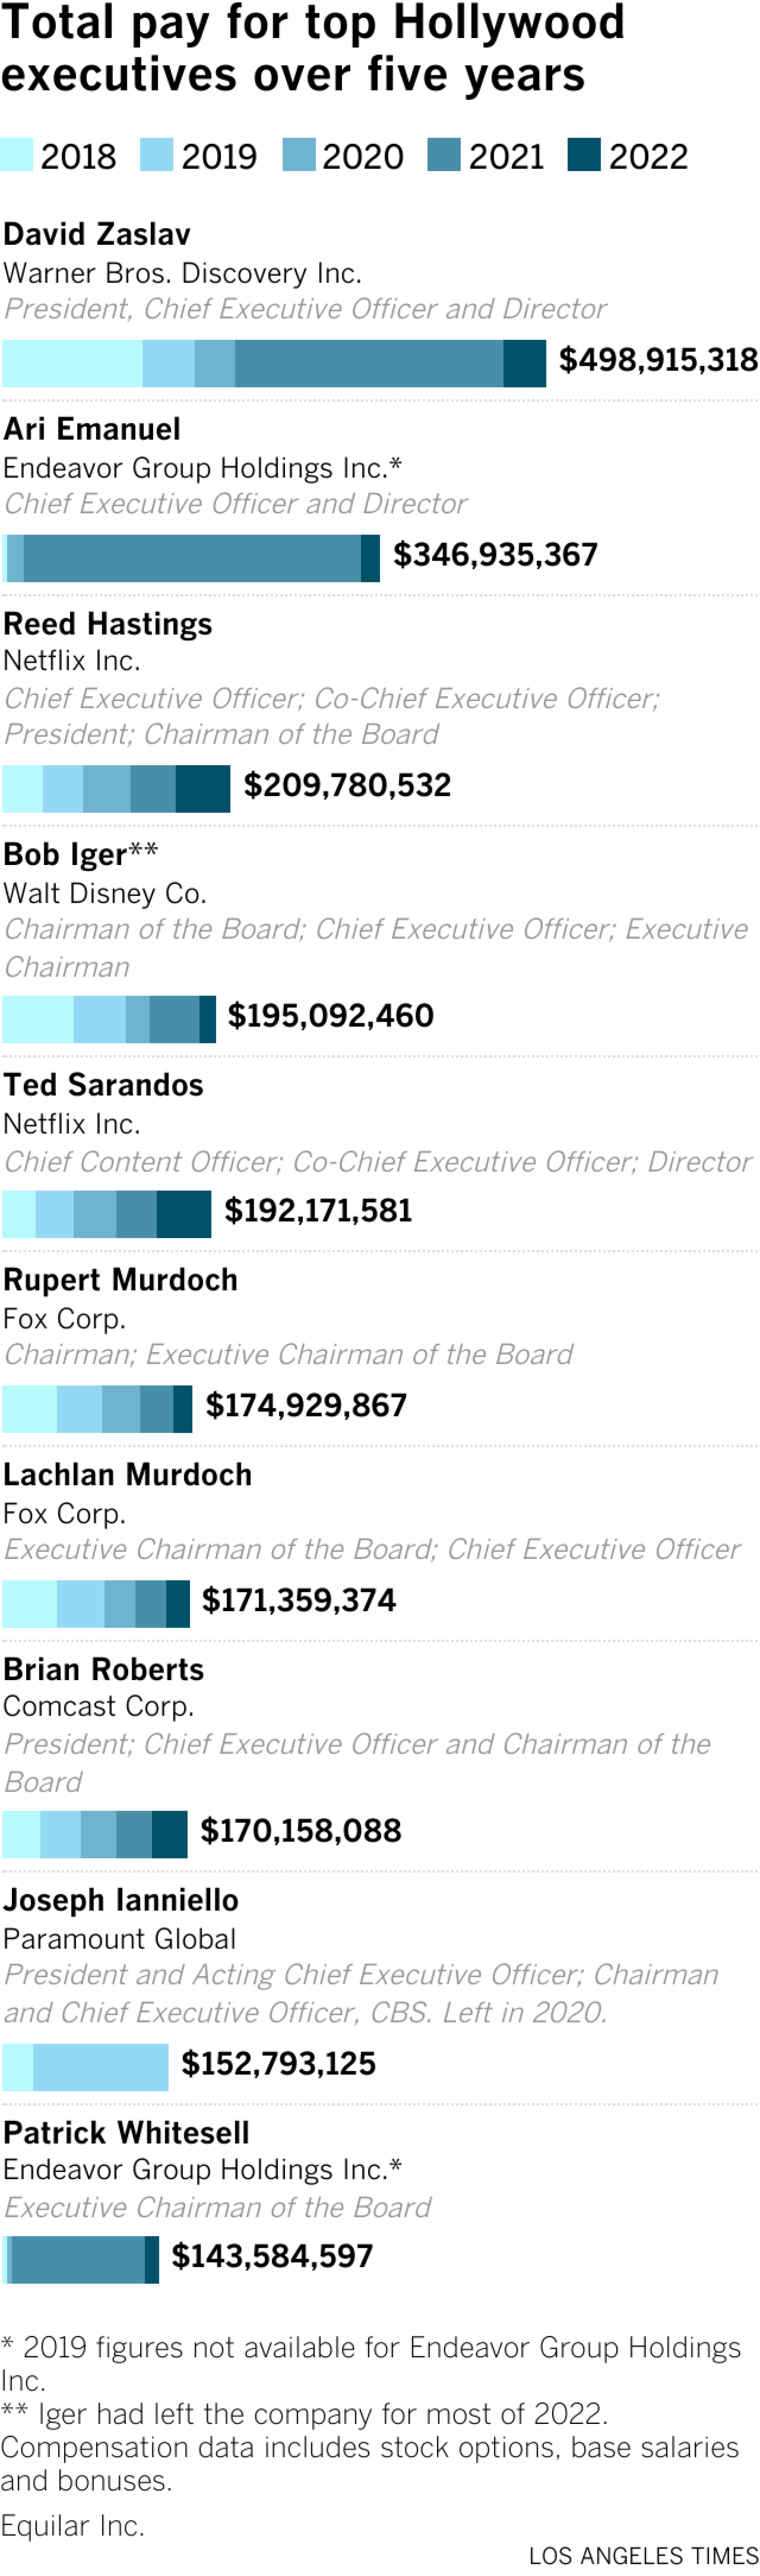 Total pay for top Hollywood executives over five years